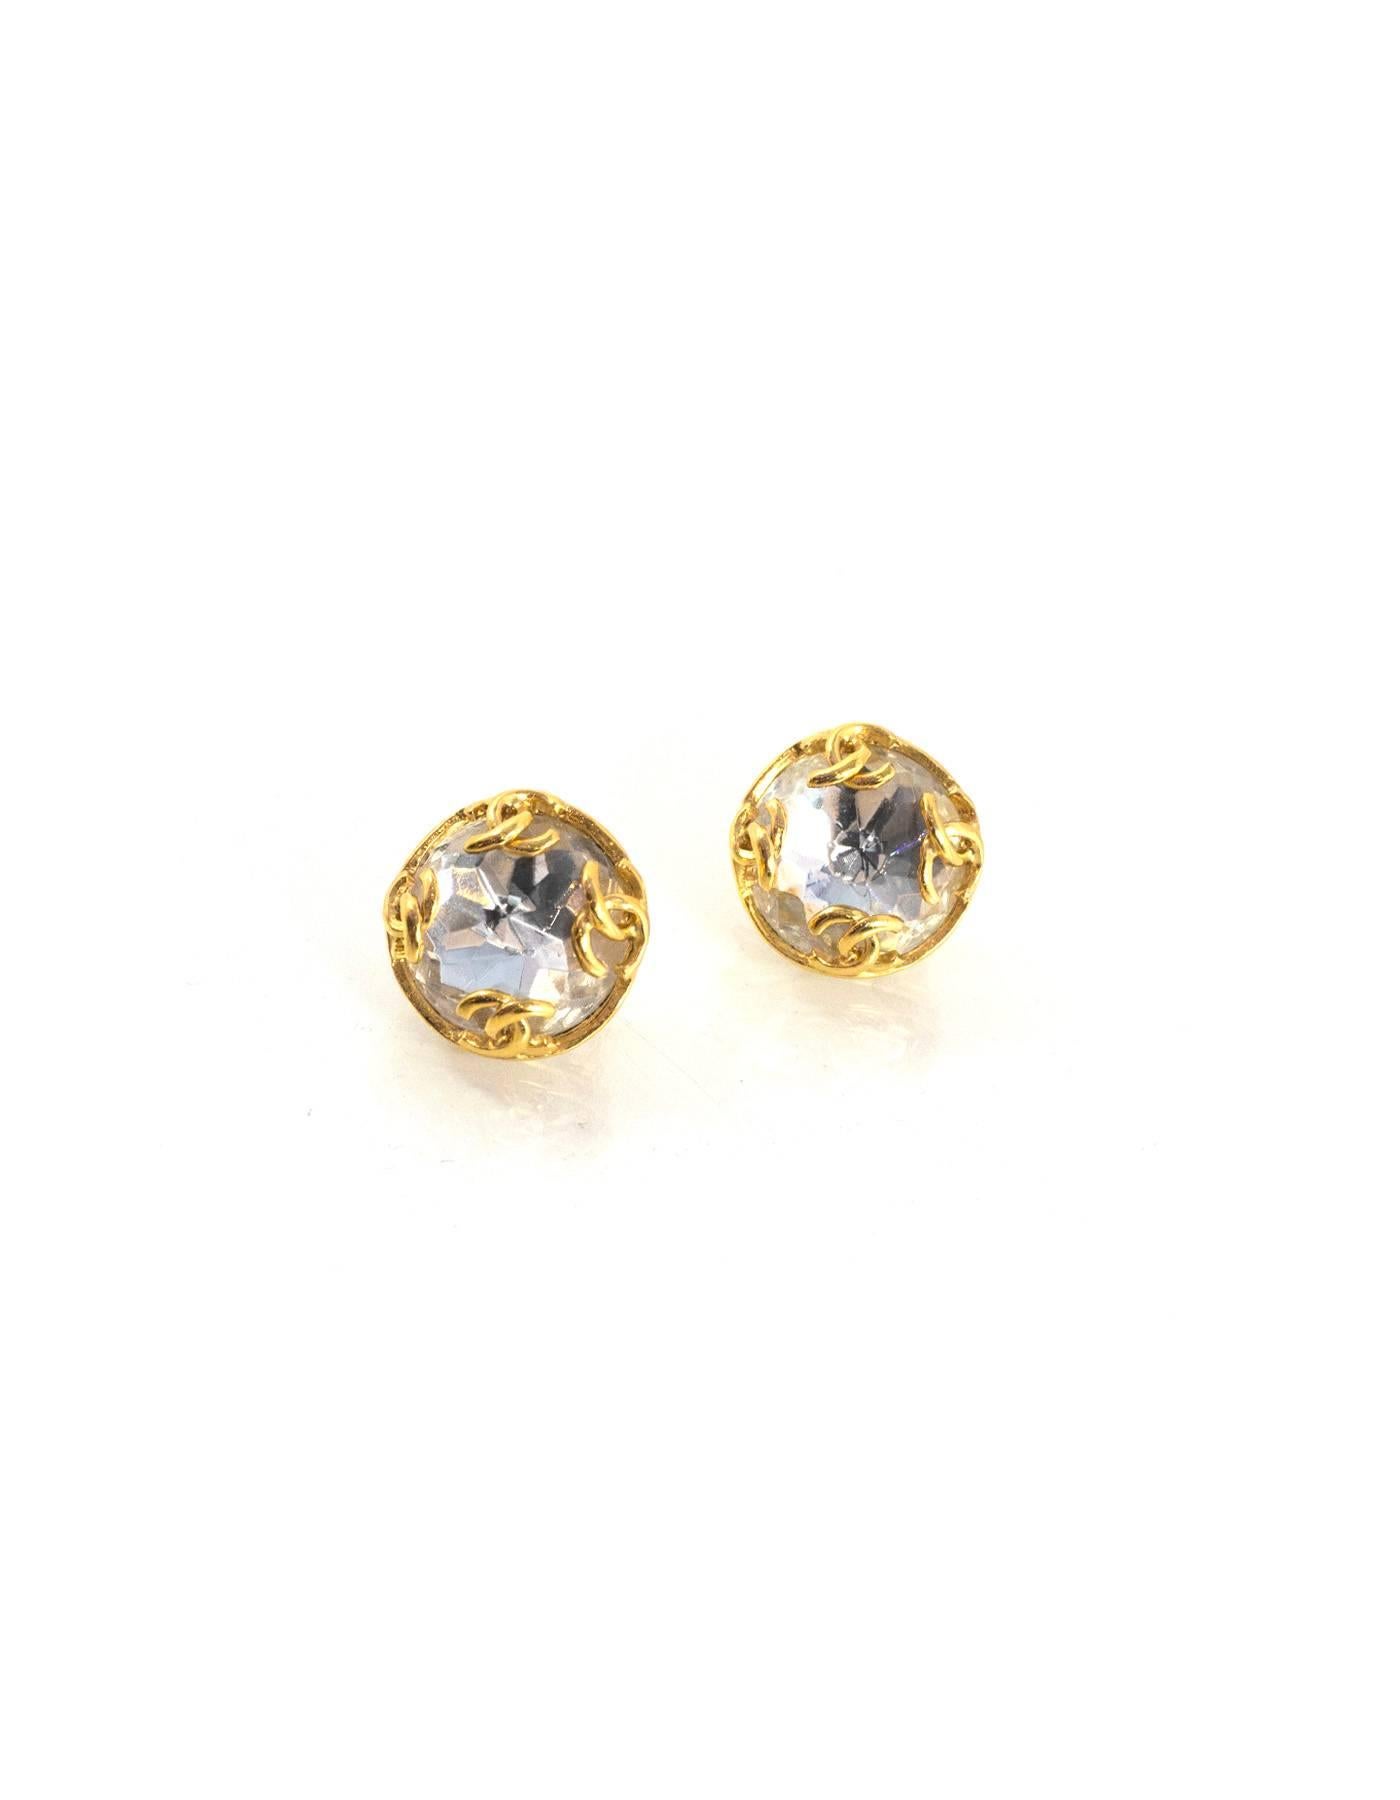 Chanel Vintage '95 Goldtone Crystal Clip On Earrings 

Made In: France
Year of Production: 1995
Color: Goldtone
Materials: Metal, crystal
Closure: Clip on
Stamp: 95 CC A
Overall Condition: Excellent vintage, pre-owned condition with the exception of